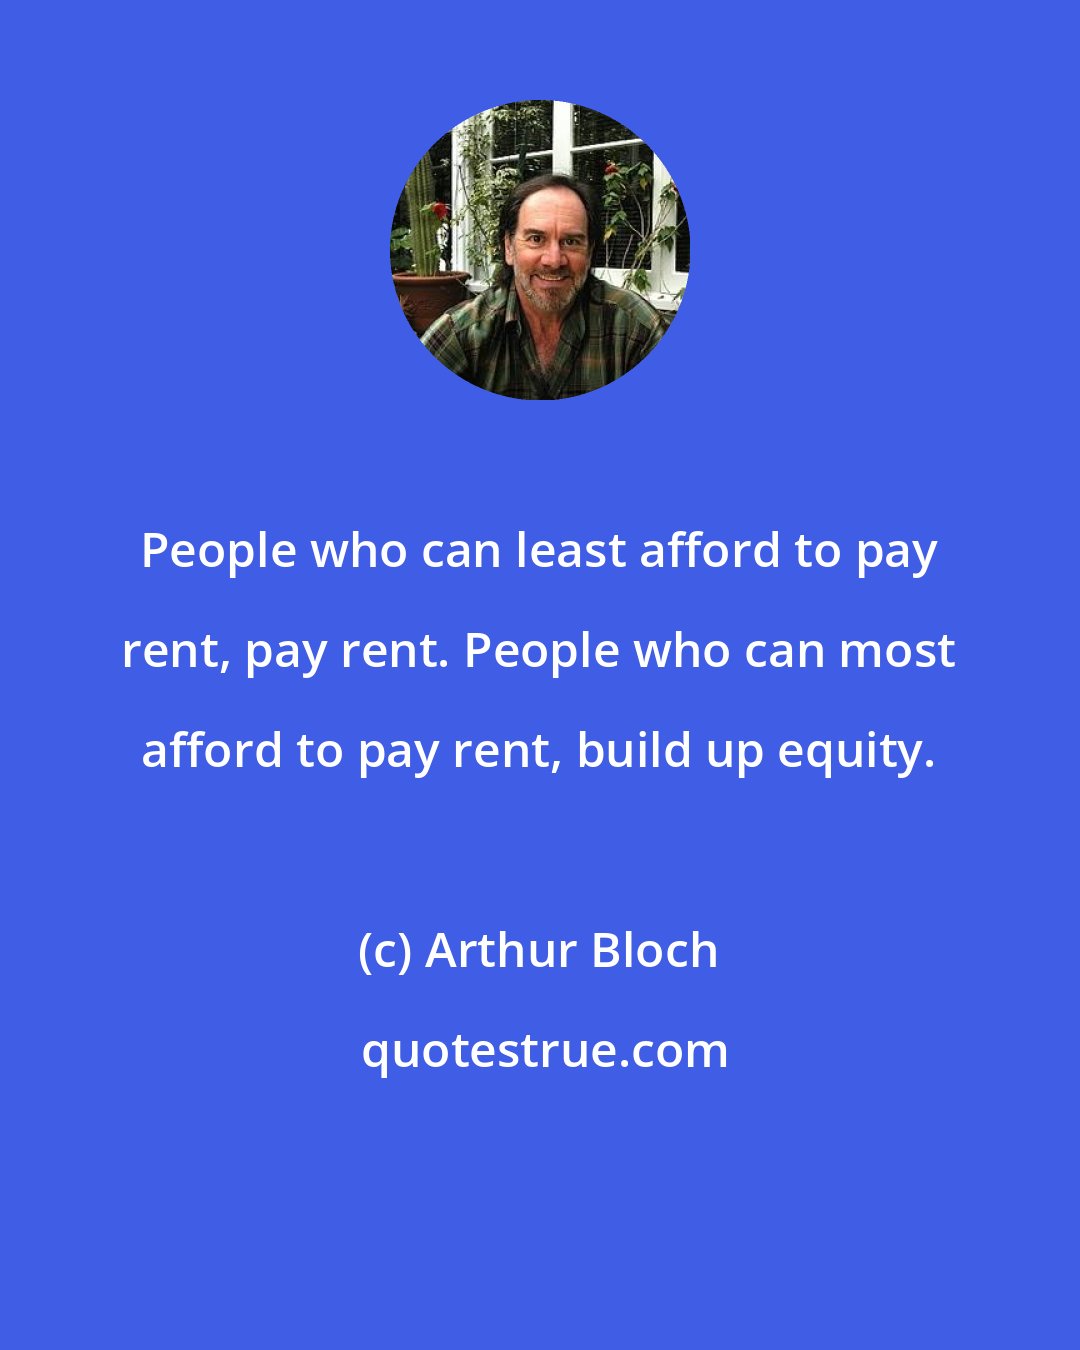 Arthur Bloch: People who can least afford to pay rent, pay rent. People who can most afford to pay rent, build up equity.